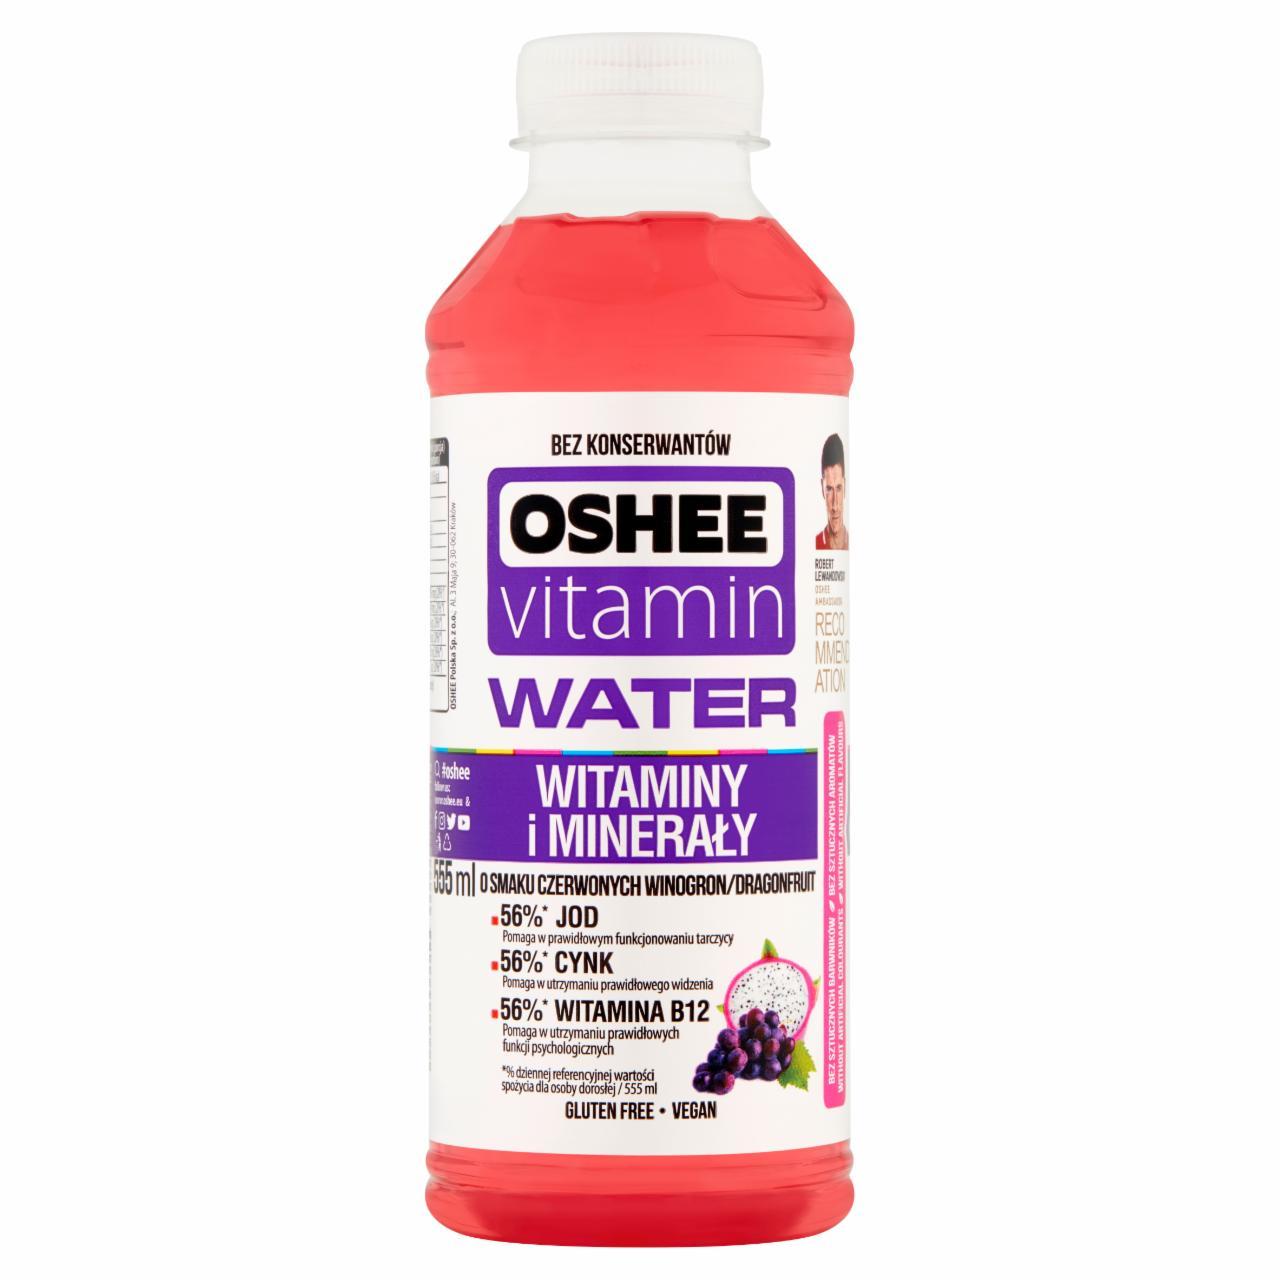 Fotografie - Vitamin water vitamins and minerals red grape/dragonfruit flavour Oshee